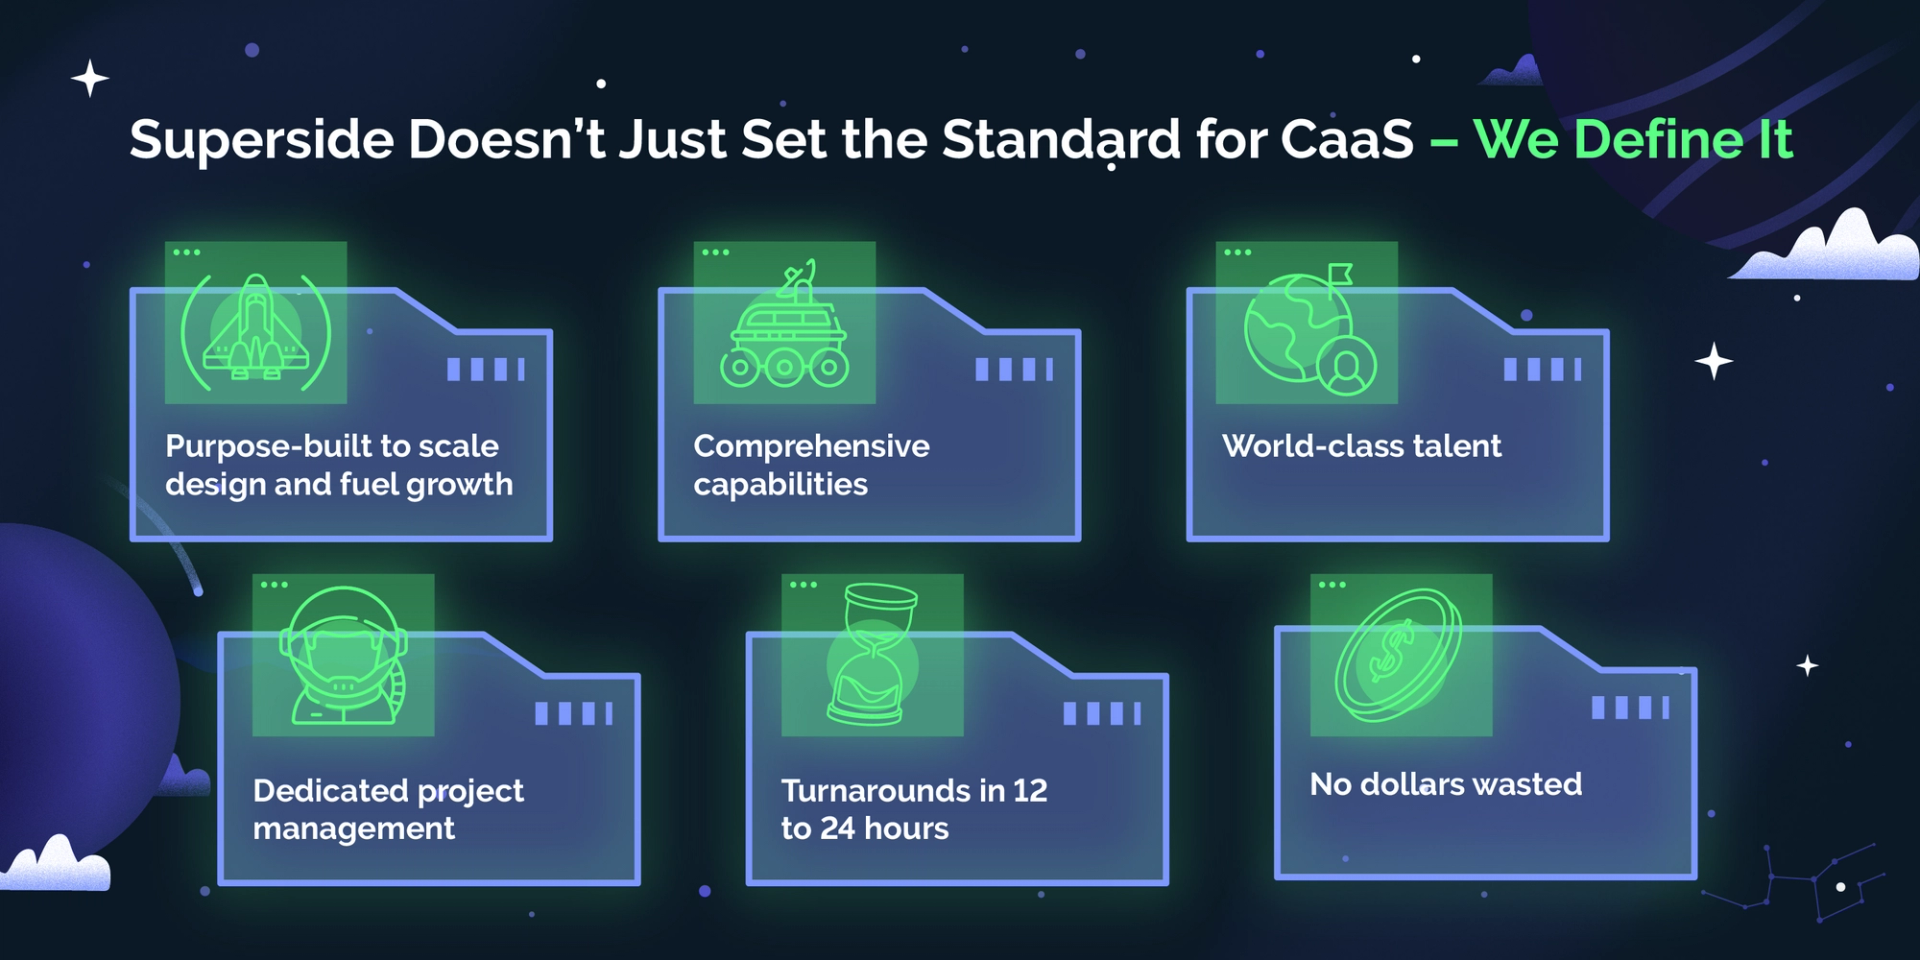 An infographic that calls out five reasons Superside sets the standard for CaaS. These include being purpose-built to scale design and fuel growth, comprehensive capabilities, world-class talent, dedicated project management, fast turnarounds and no dollars wasted. 